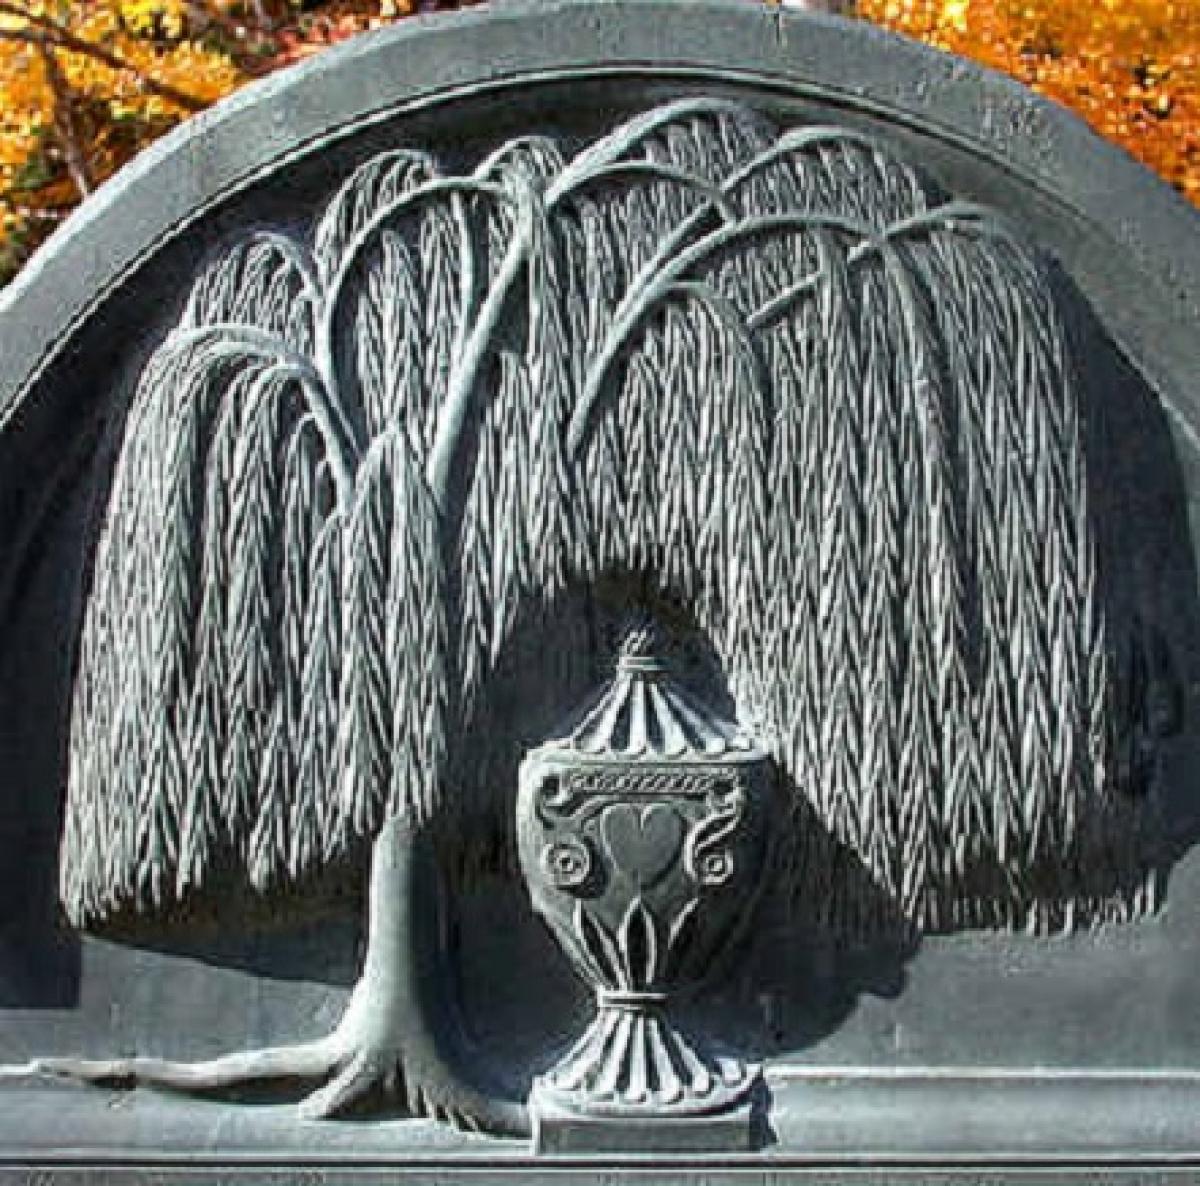 OK, Grove, Headstone Symbols and Meanings, Weeping Willow Tree